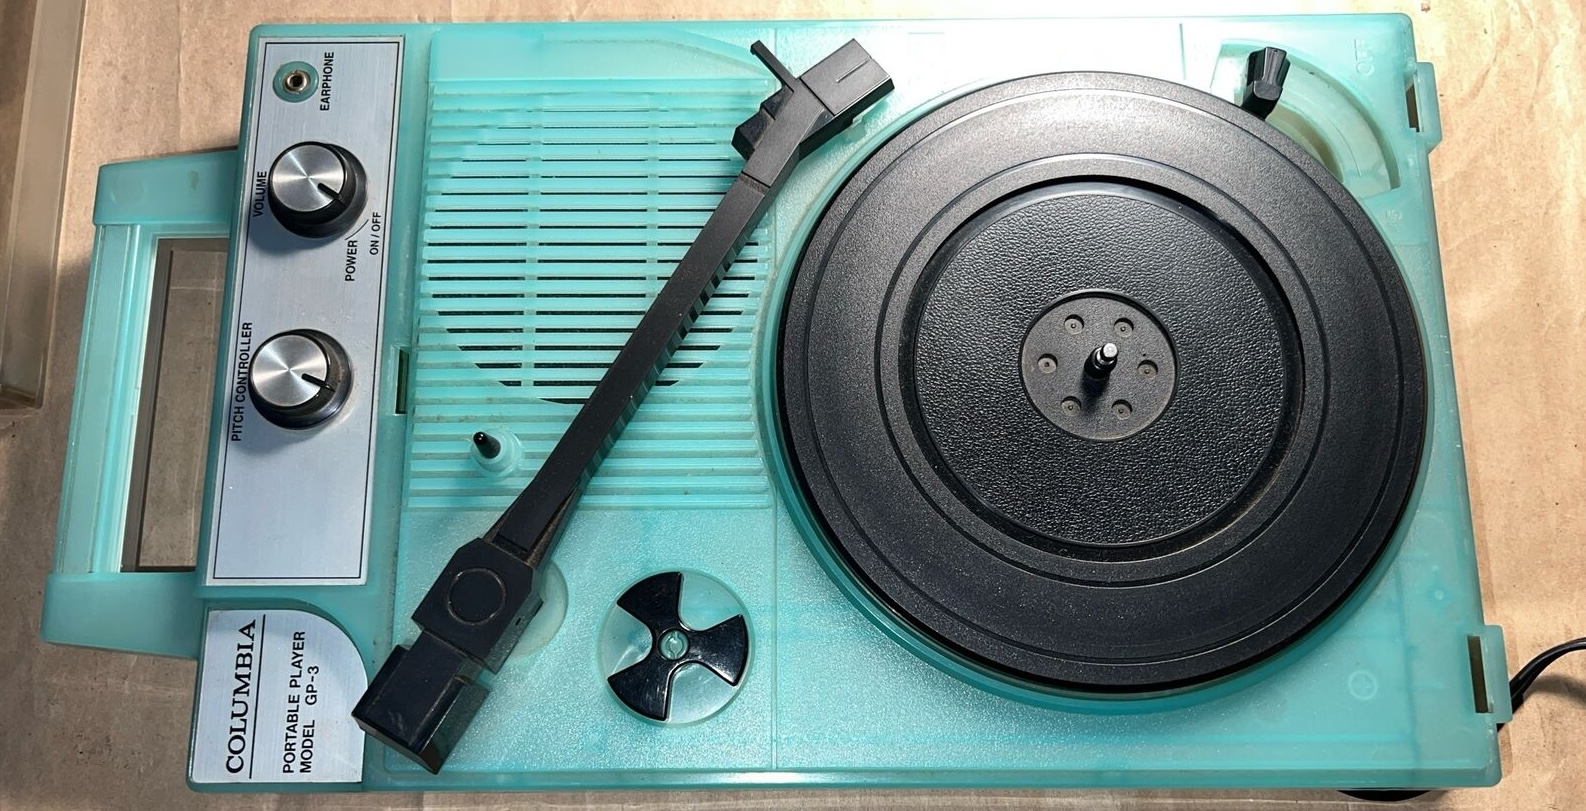 Turntable 128 - Columbia GP-38 Portable Record Player - 41 Rooms - show 128